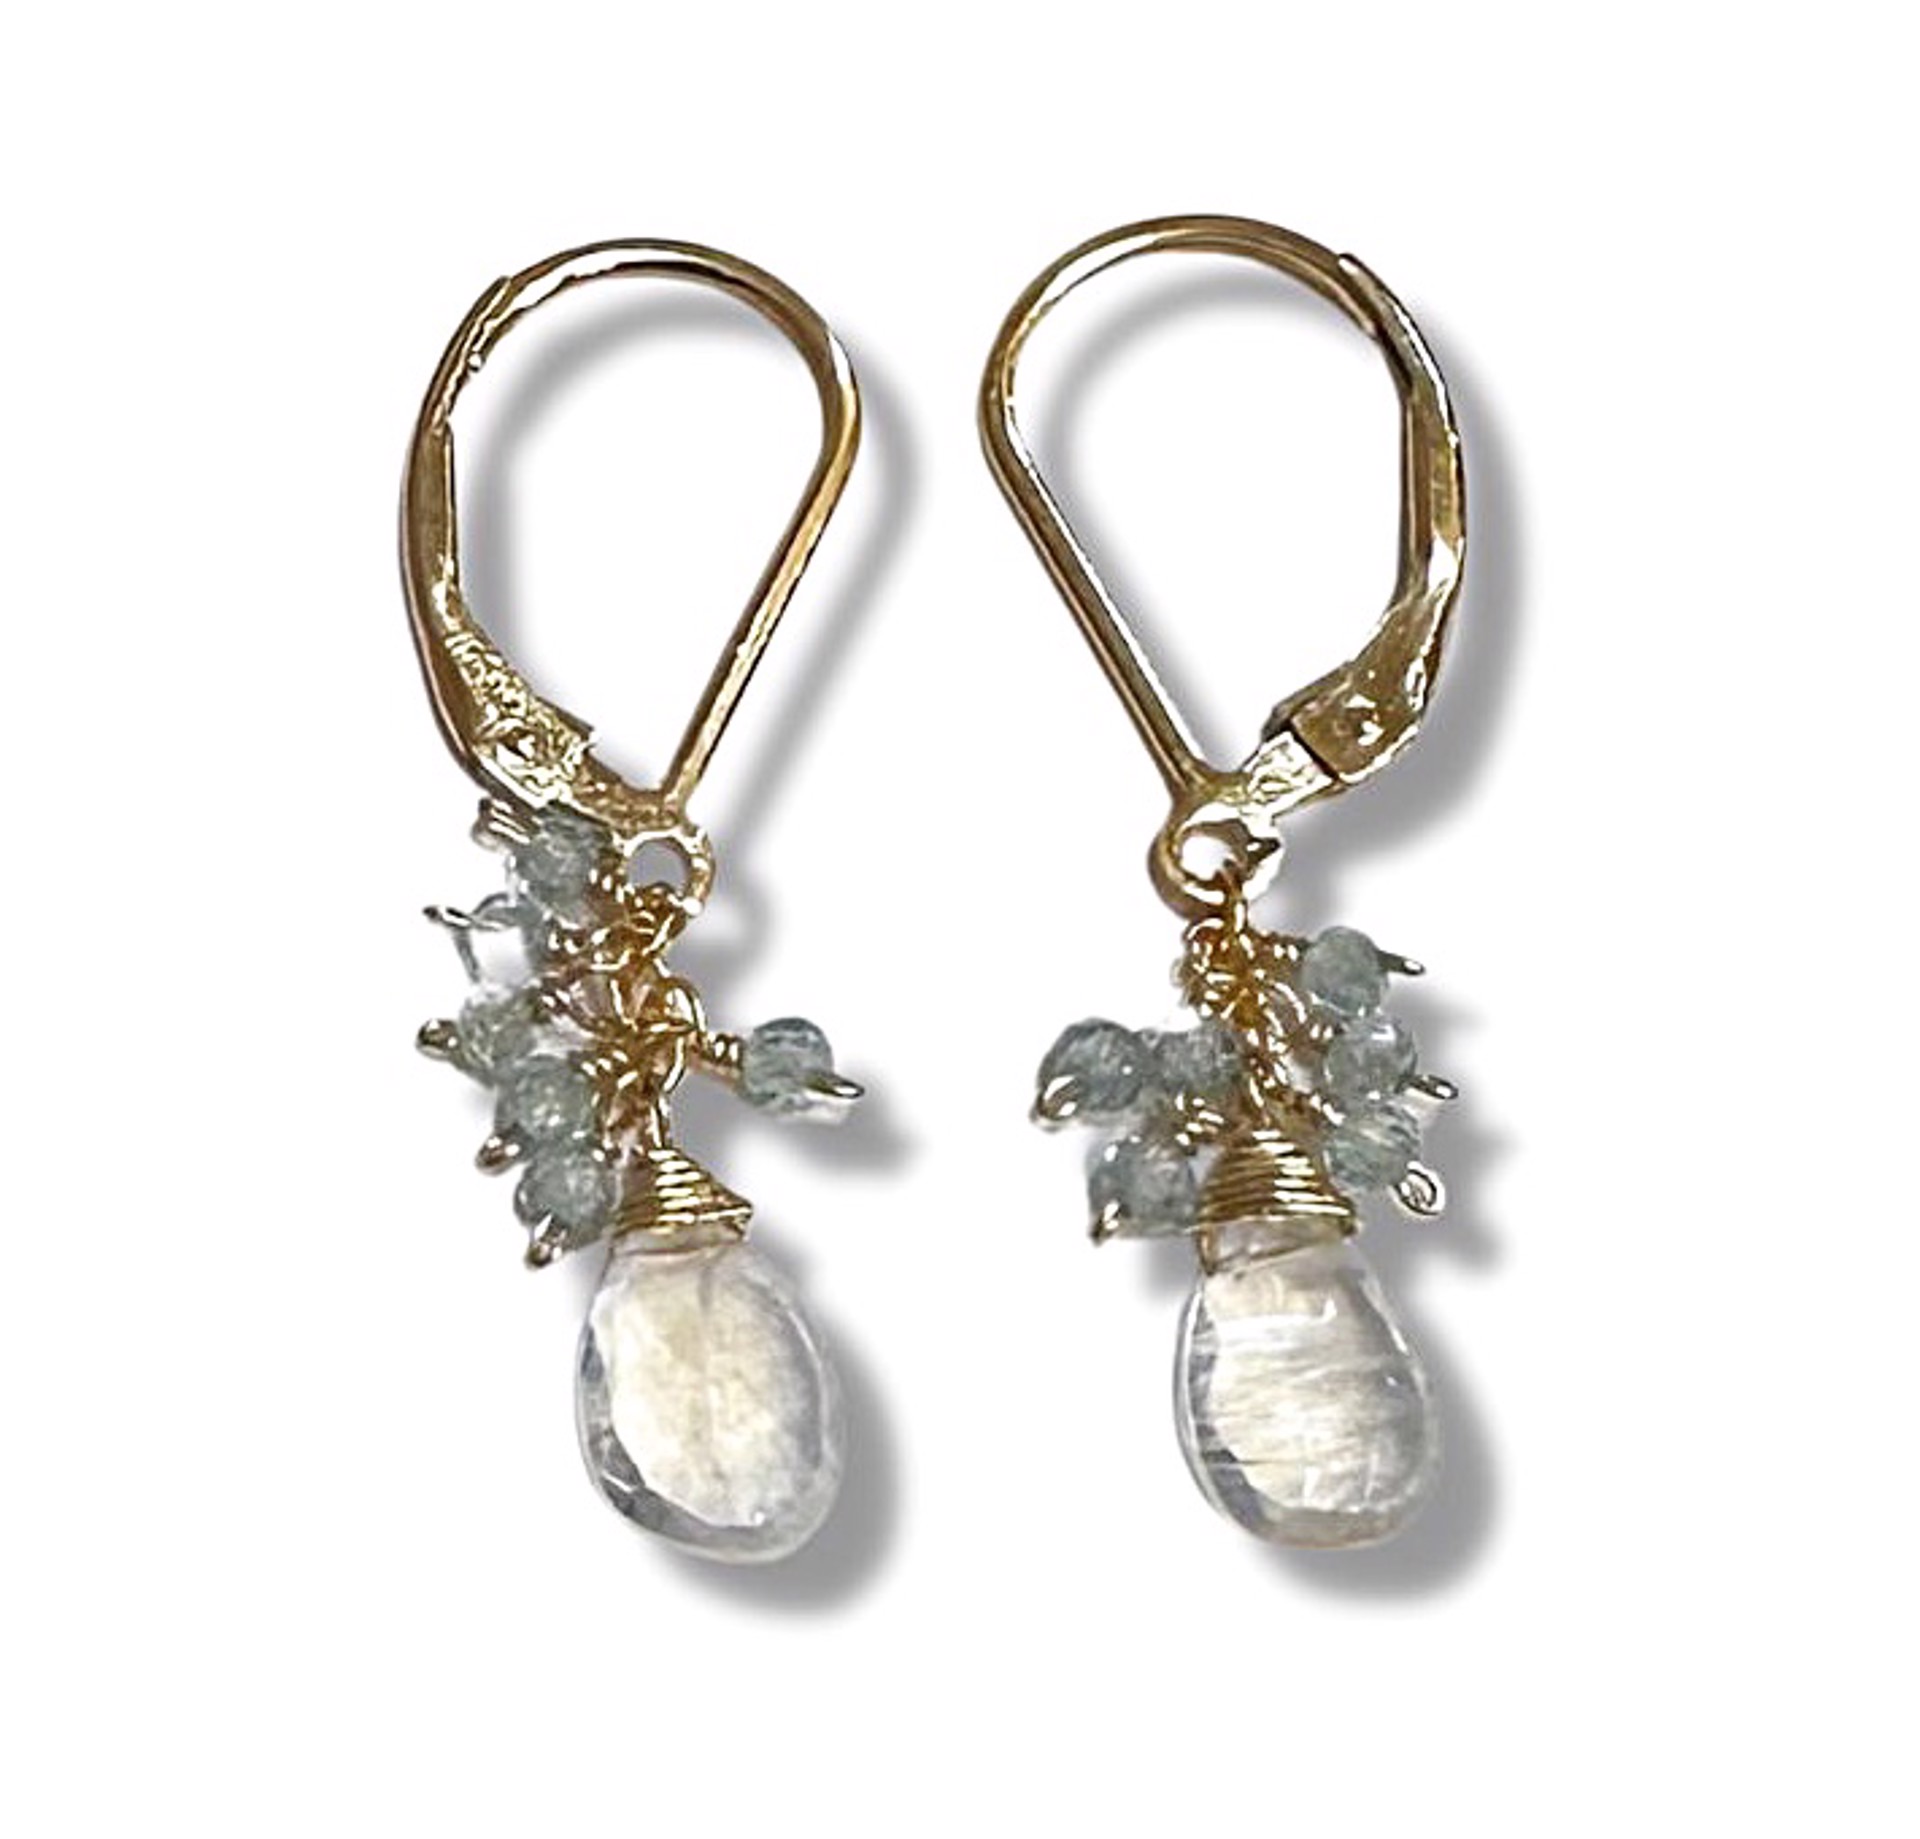 Earrings - Blue Zircon and Moonstone Drop with 14K Gold by Julia Balestracci